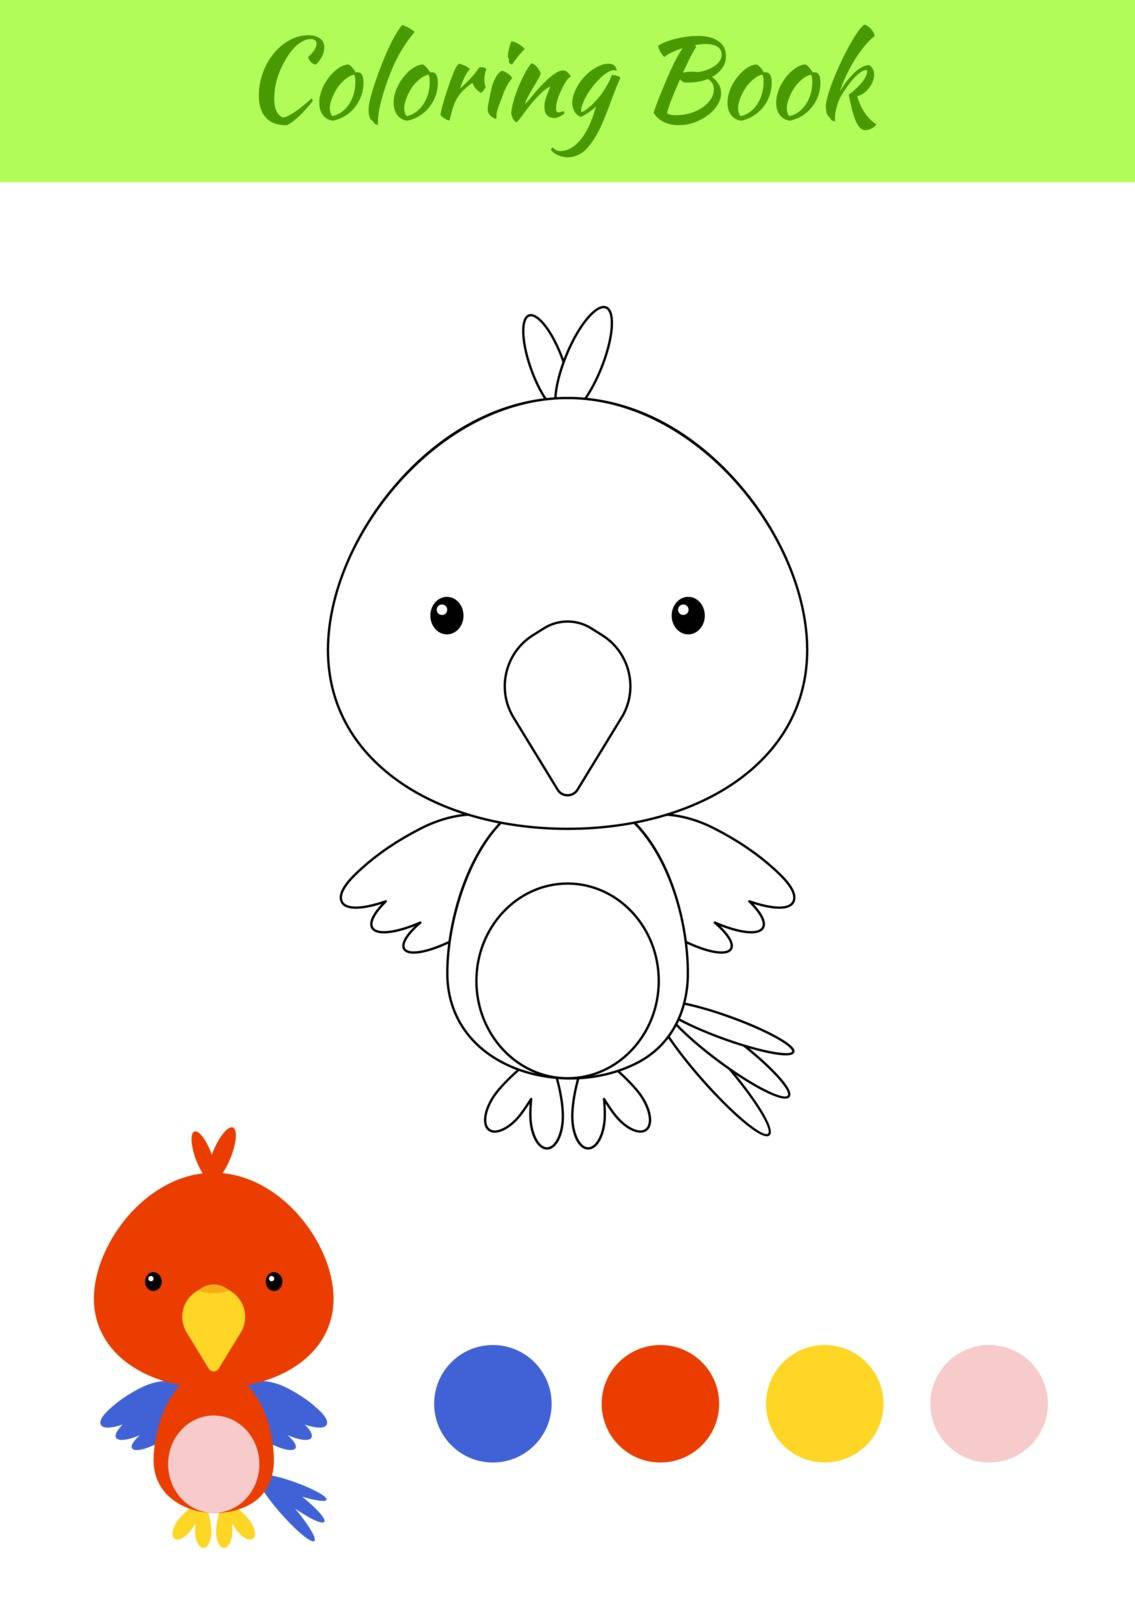 Coloring page happy little baby parrot. Printable coloring book for kids. Educational activity for kindergarten and preschool with cute animal. Flat cartoon colorful vector illustration.